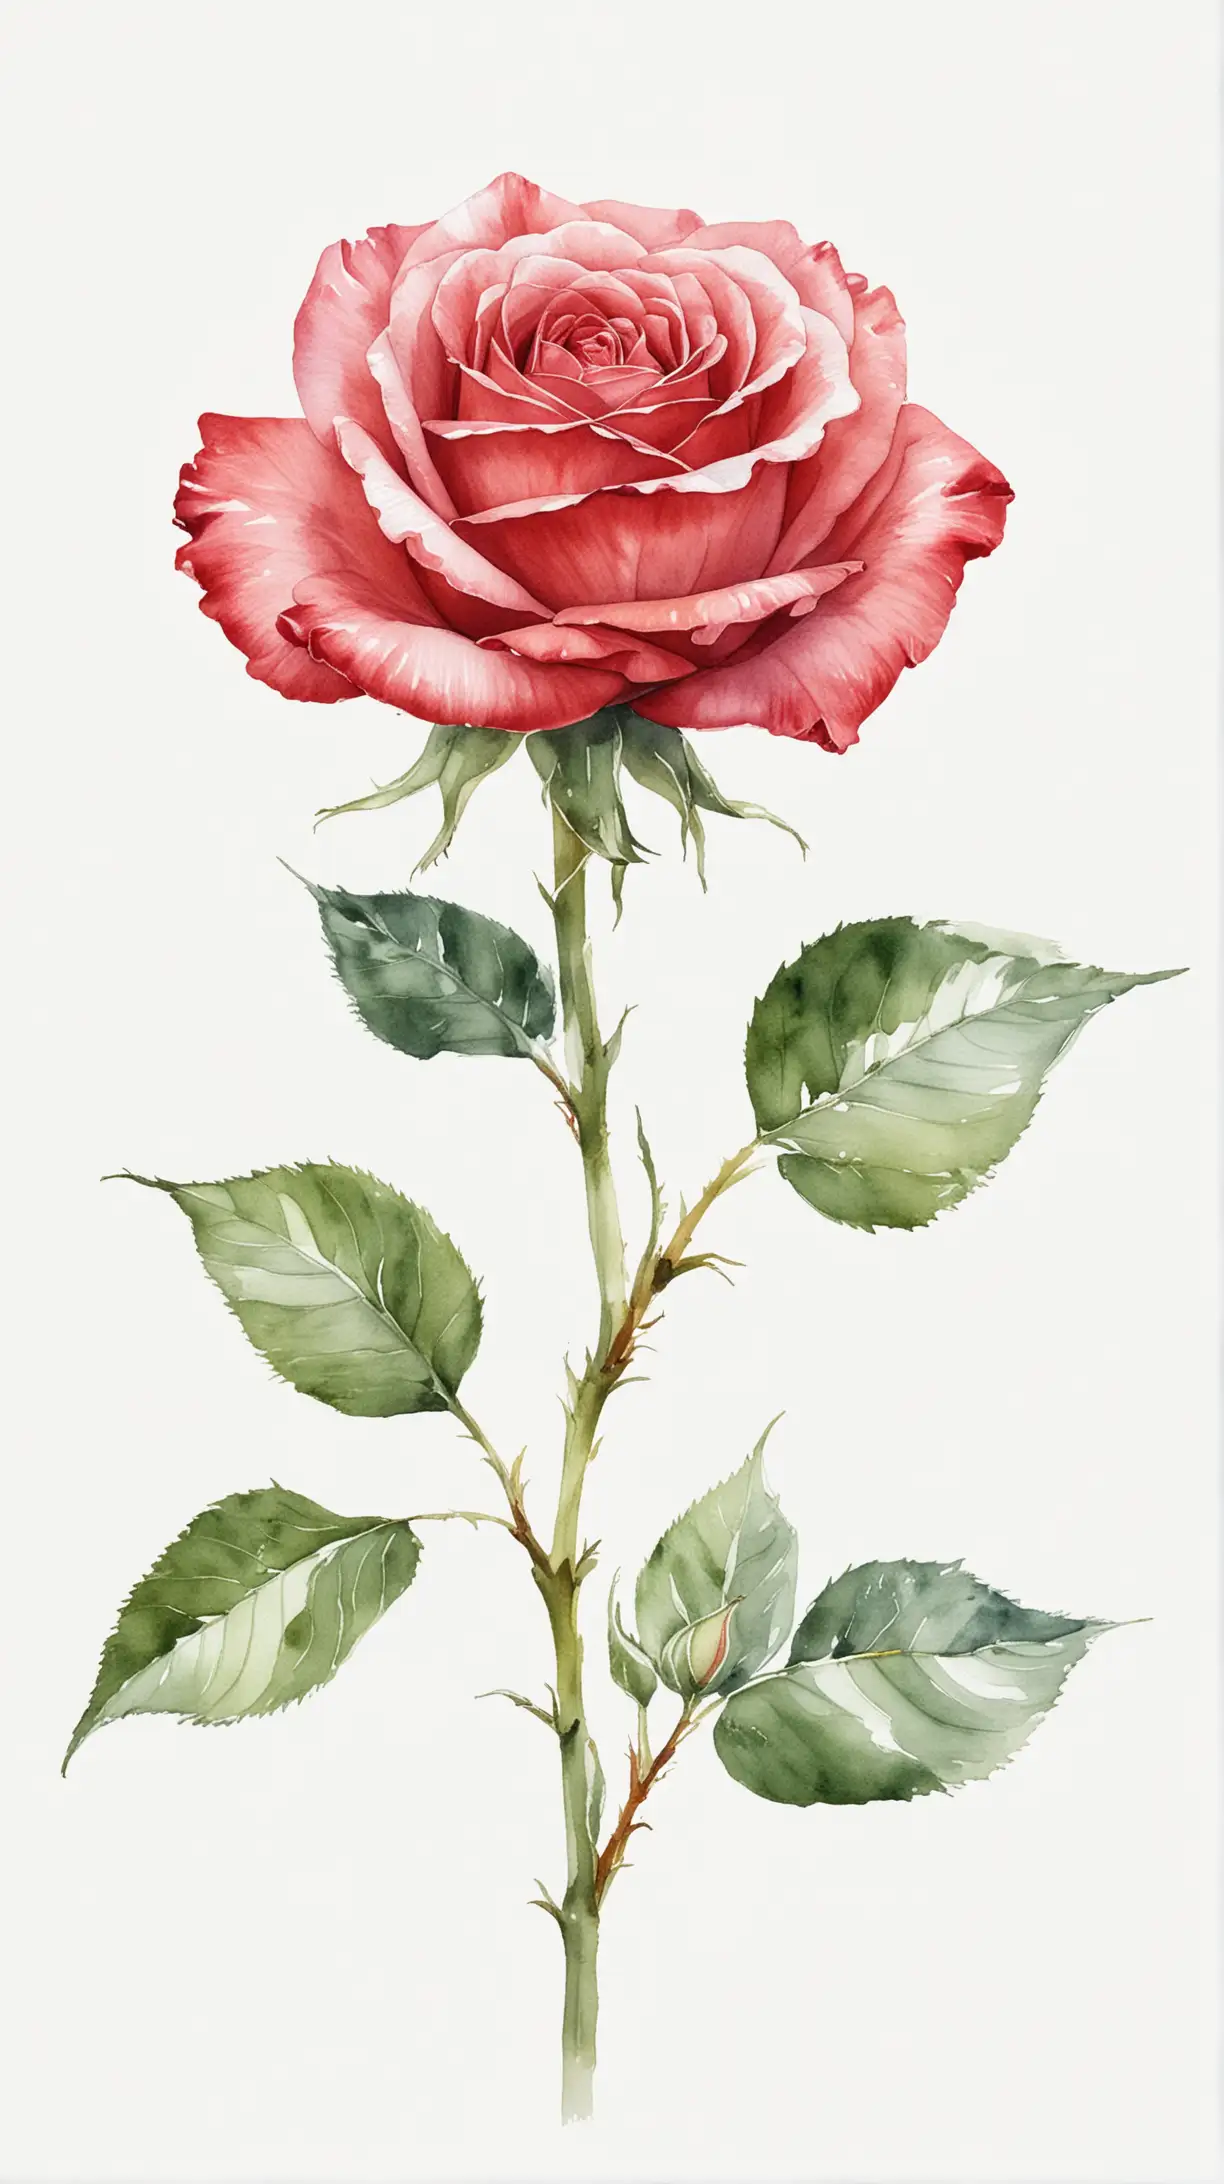 Single Red Rose on White Background in Watercolor Style